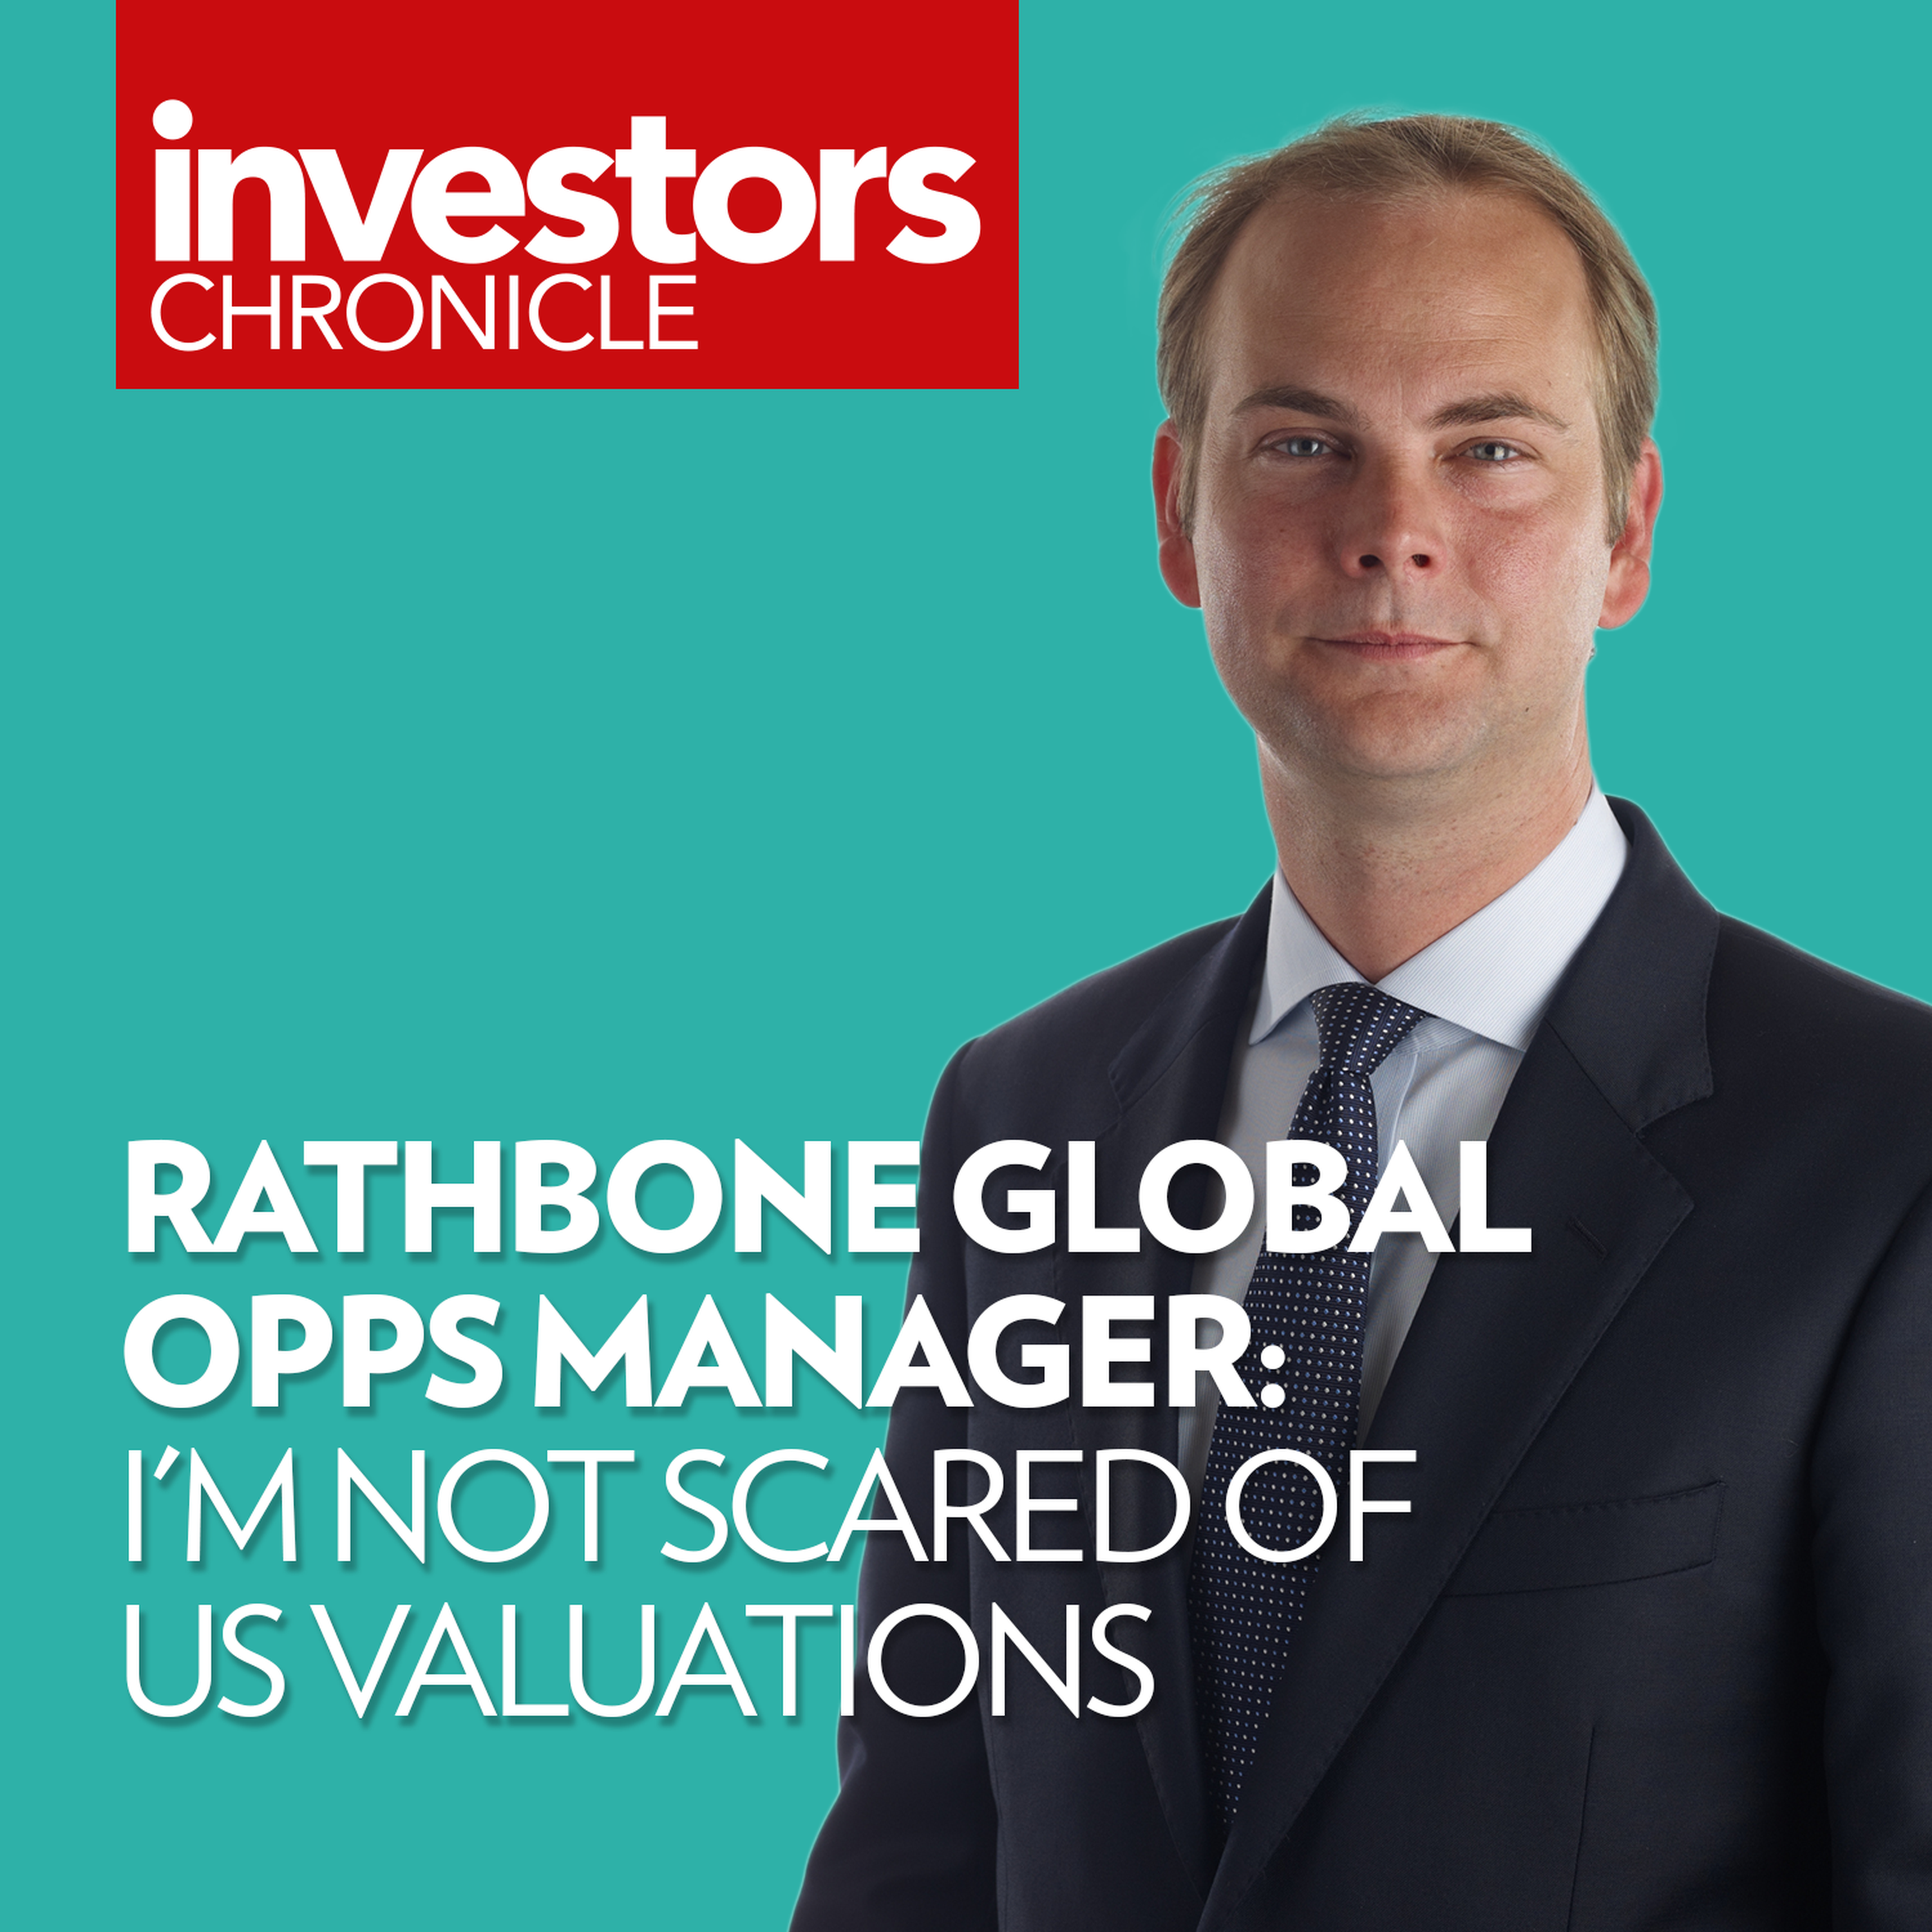 Rathbone Global Opps manager: I'm not scared of US valuations